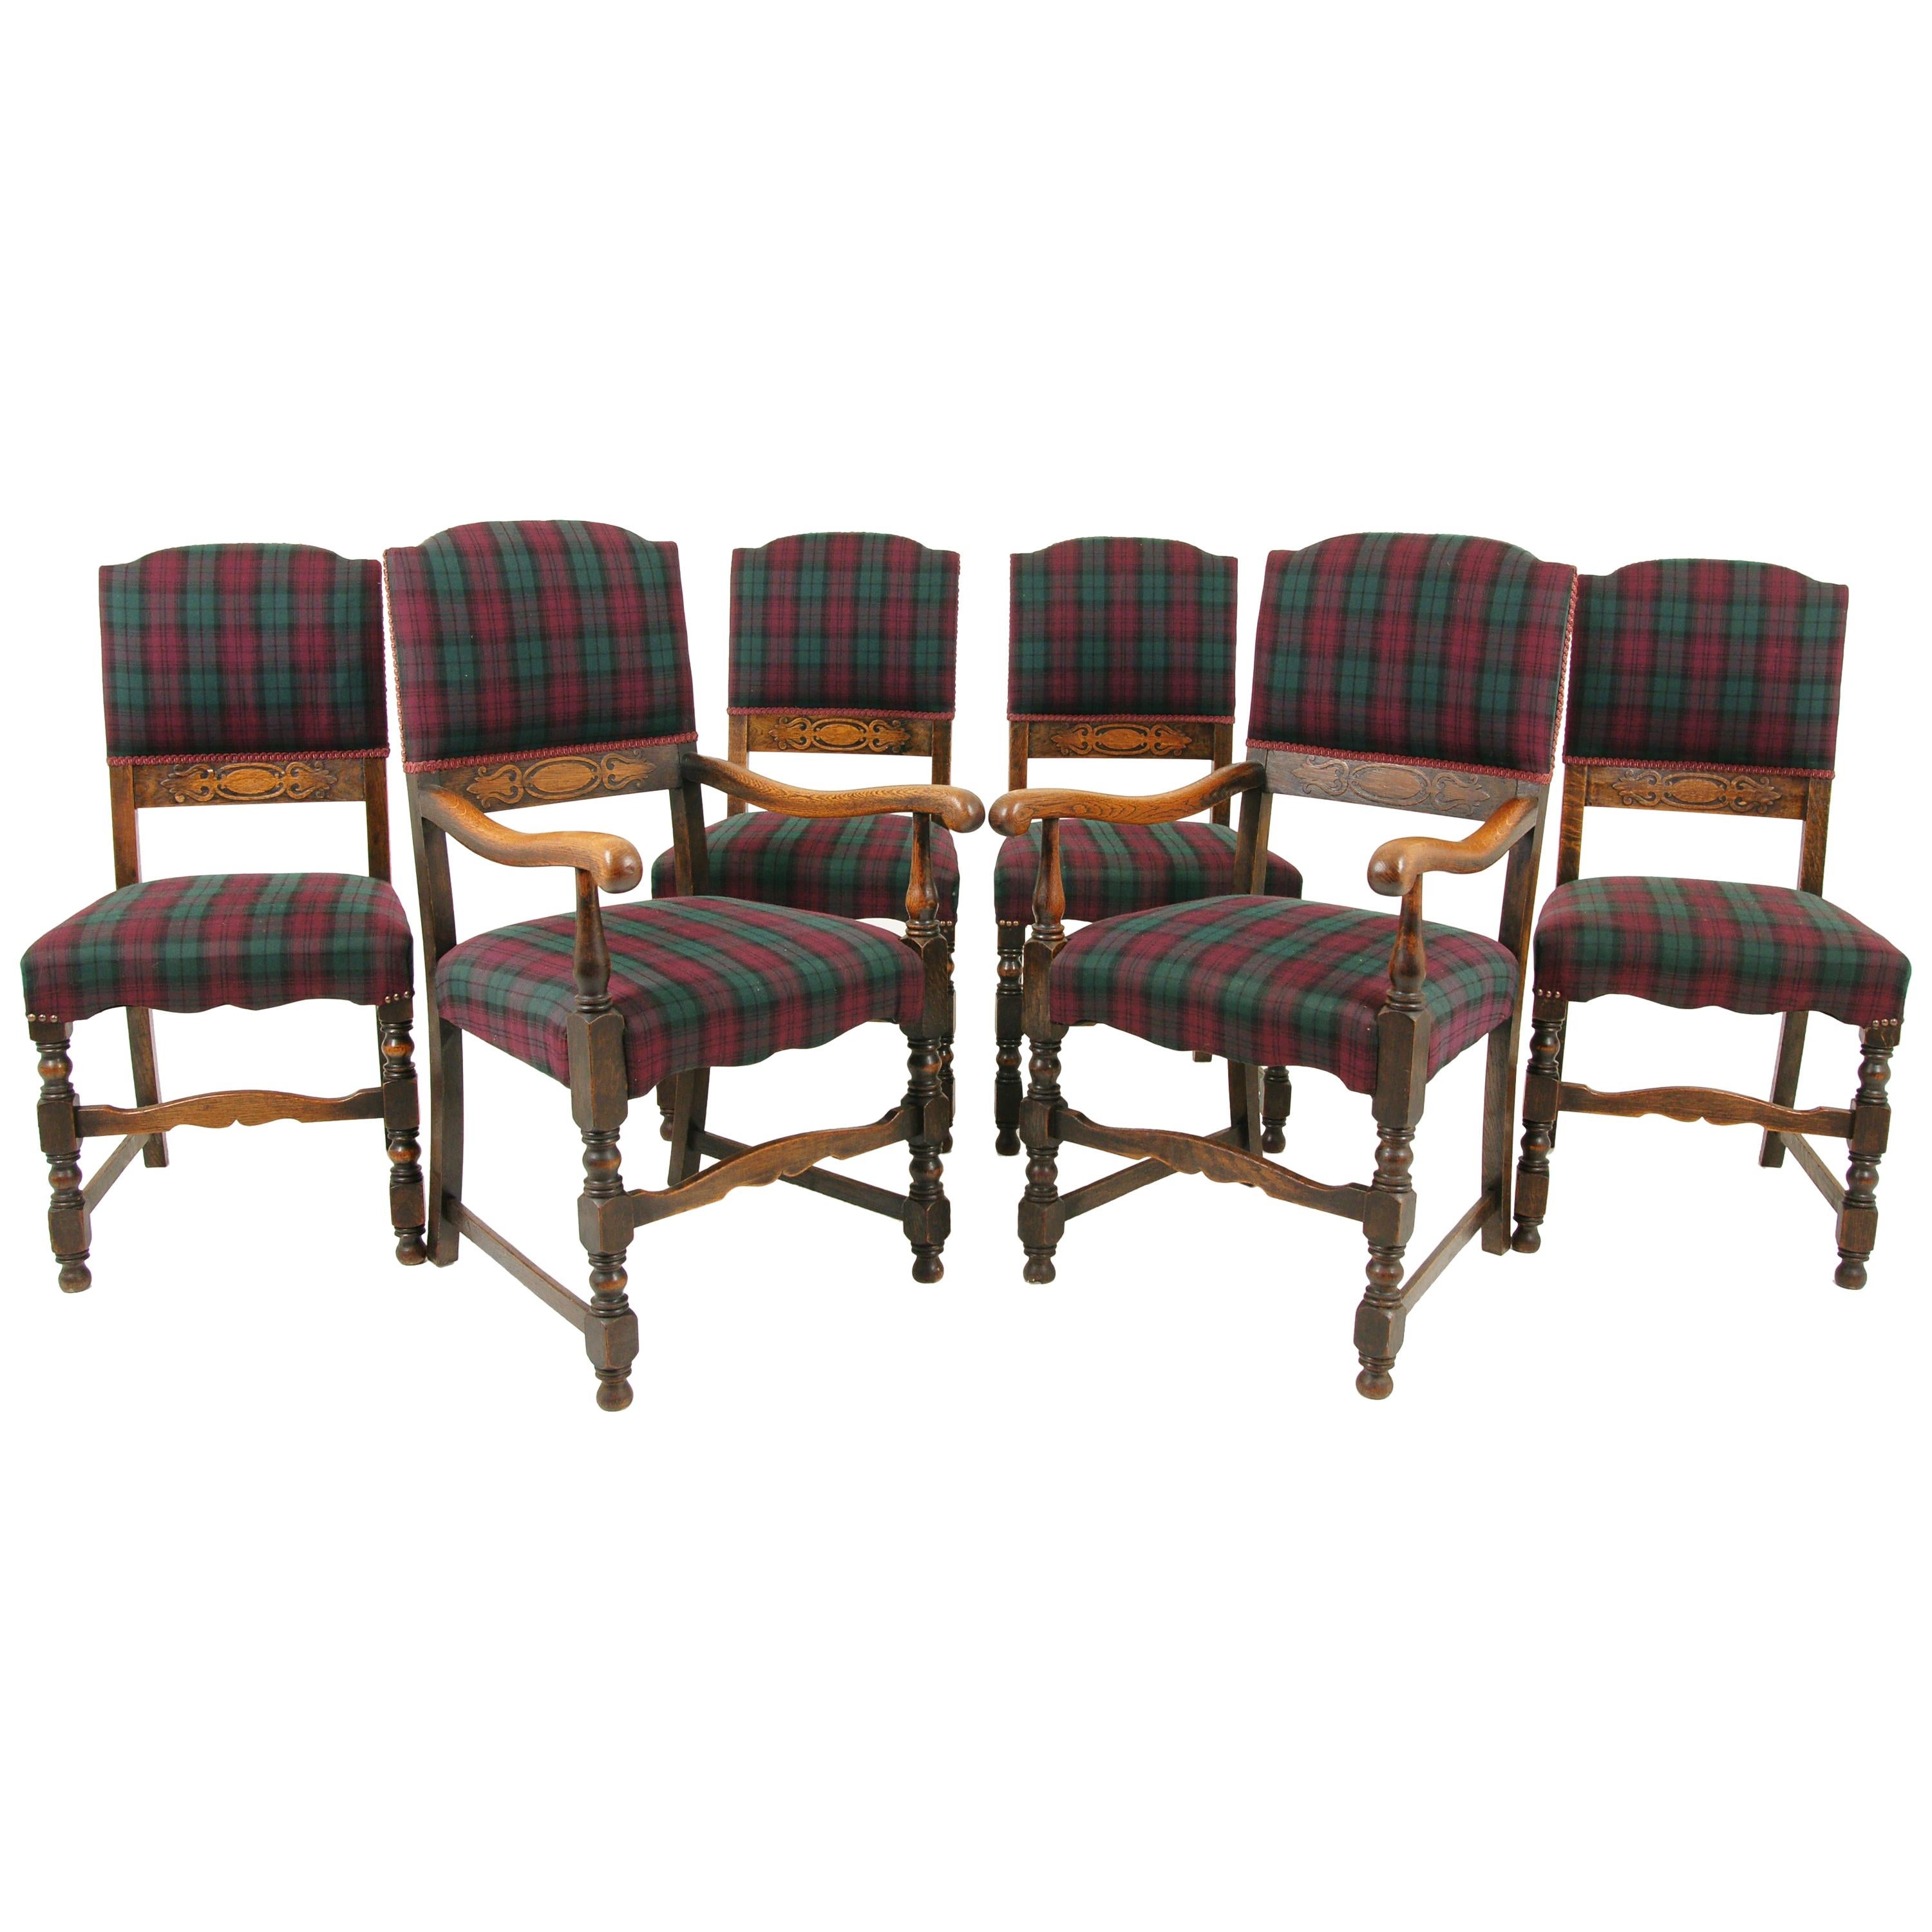 6 Antique Dining Chairs, Carved Oak Upholstered Chairs, Scotland 1920